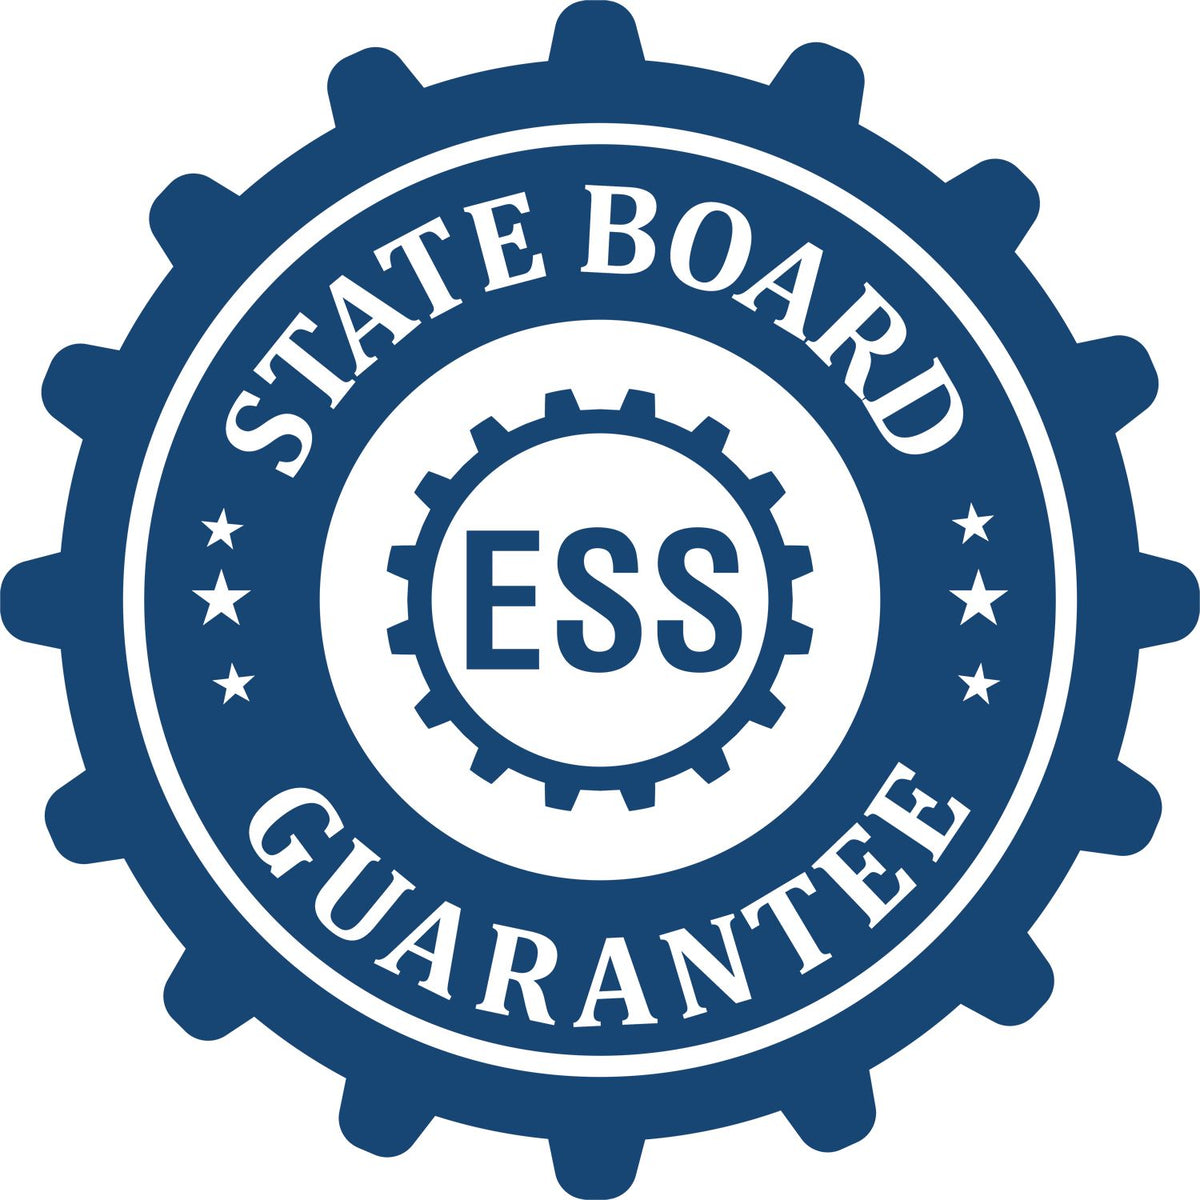 An emblem in a gear shape illustrating a state board guarantee for the Soft Nevada Professional Engineer Seal product.